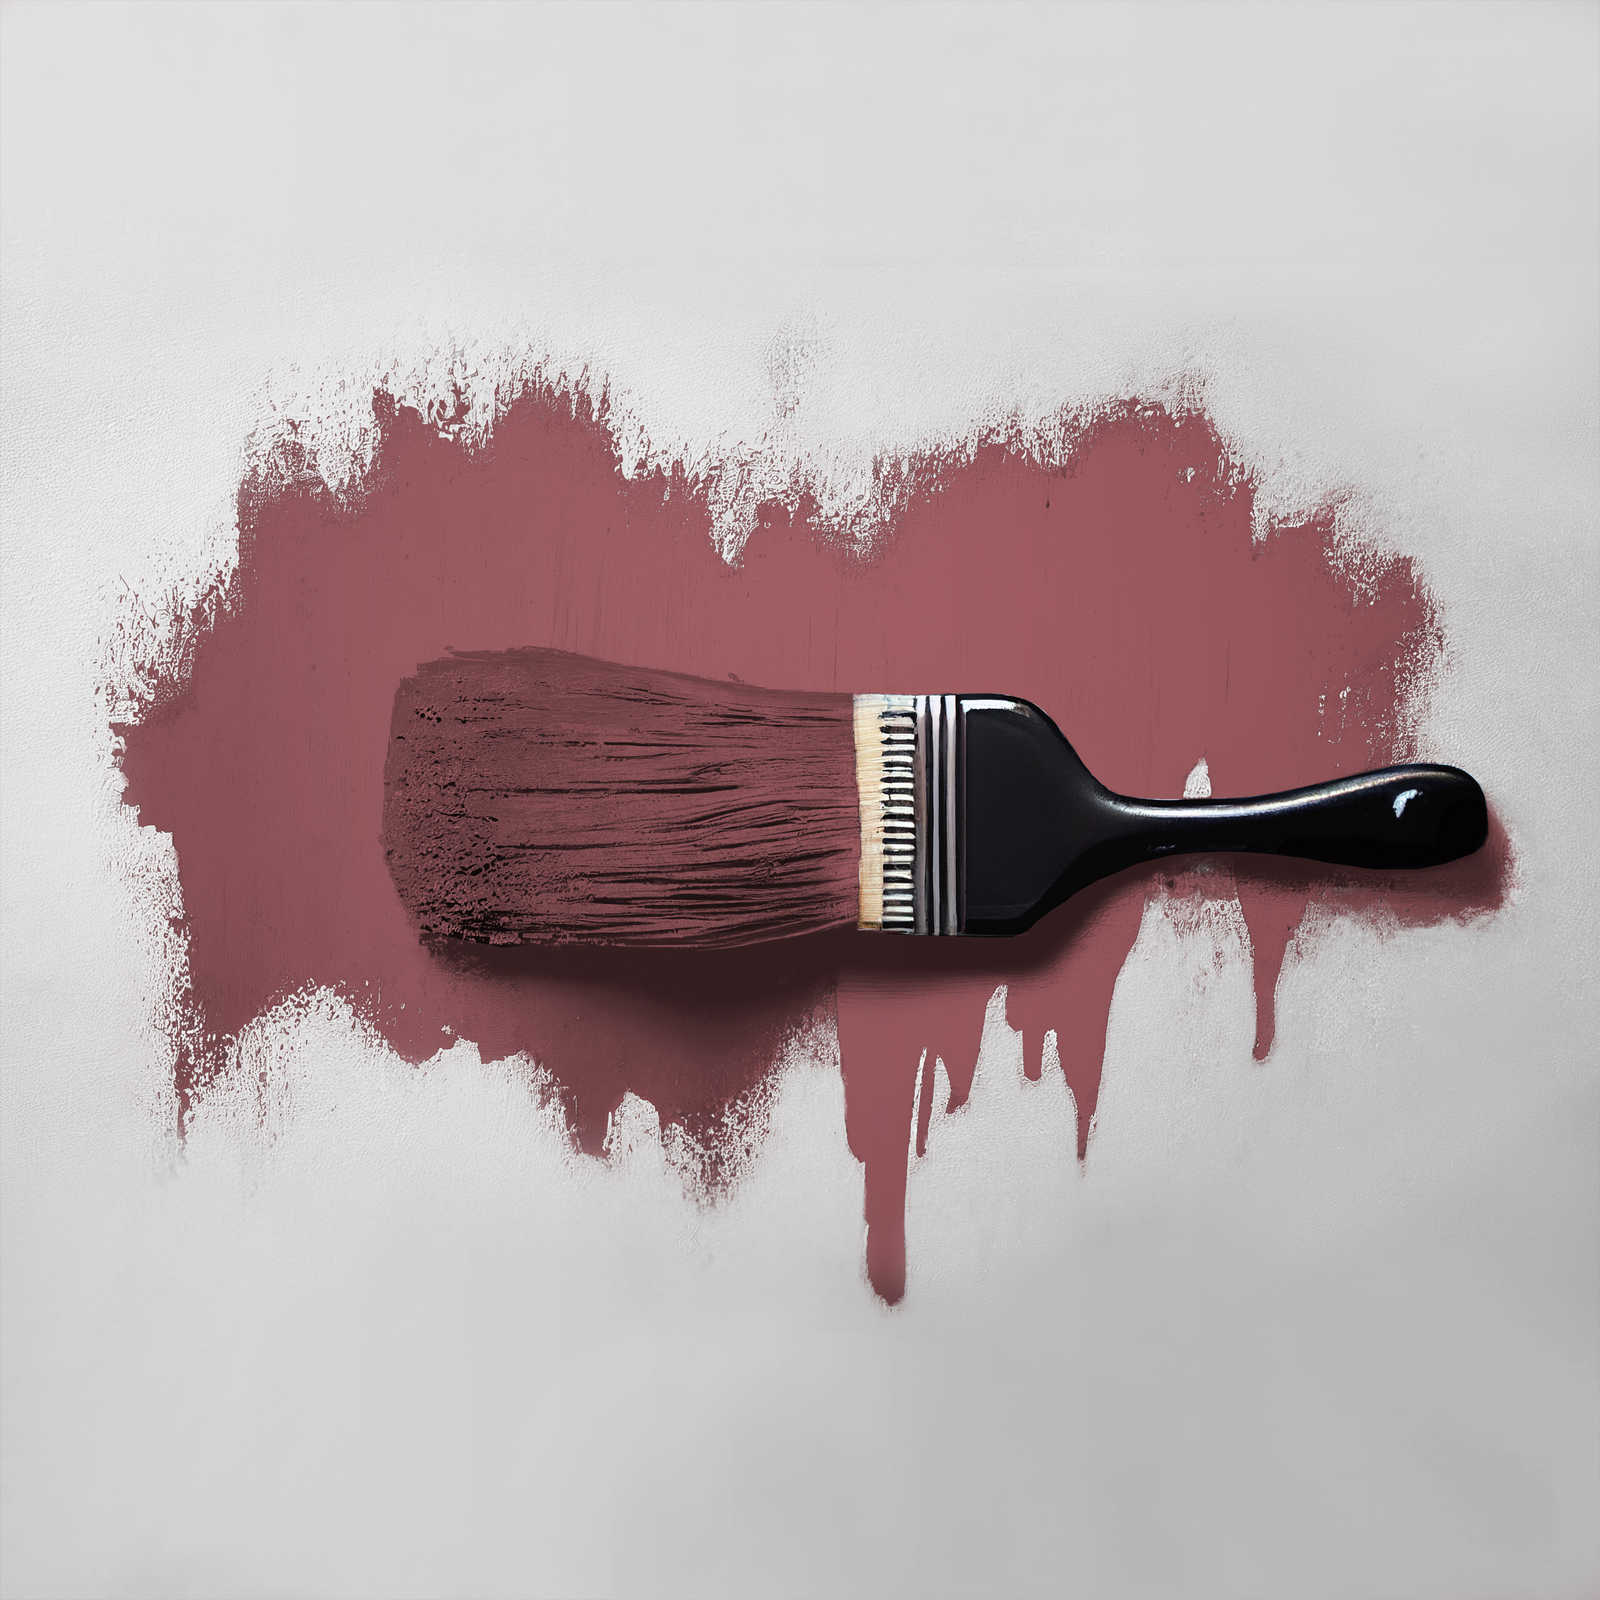             Wall Paint TCK7012 »Sweet Marmelade« in authentic berry shade – 5.0 litre
        